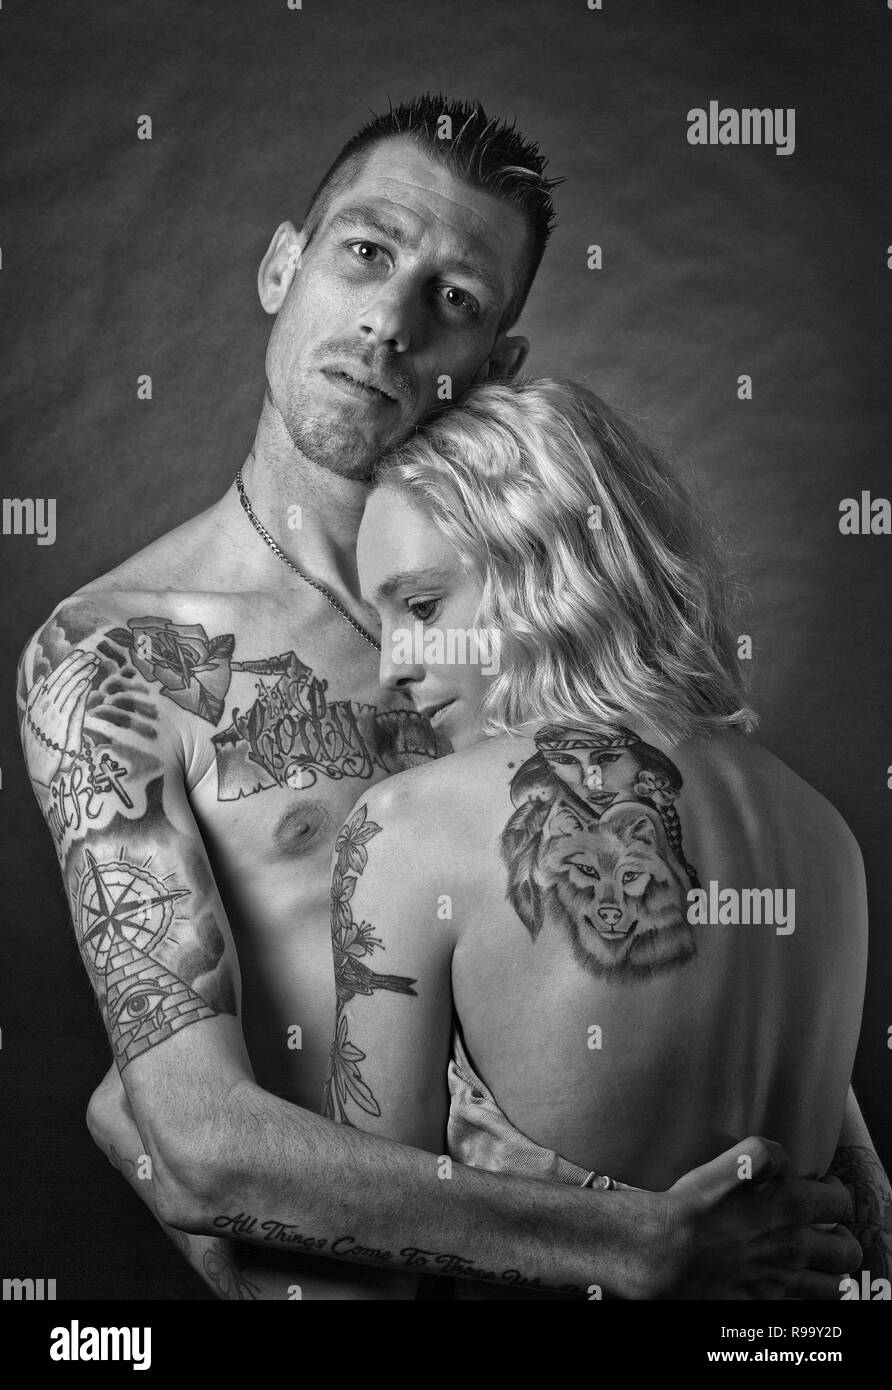 A young couple with tattoos Stock Photo